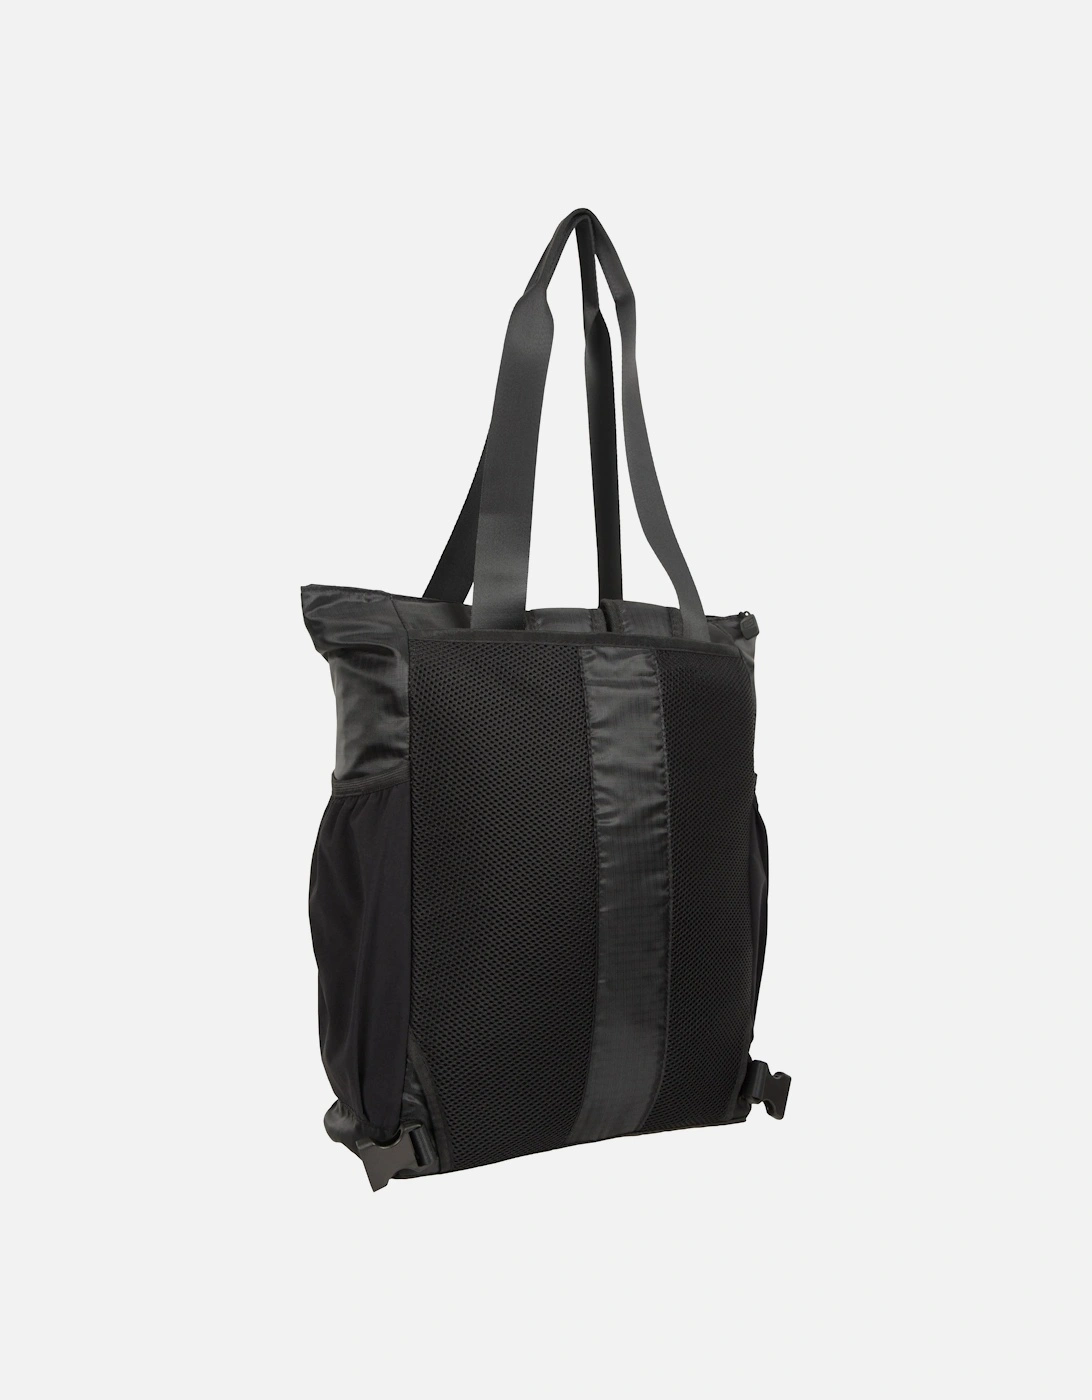 Tote 2 in 1 15L Backpack